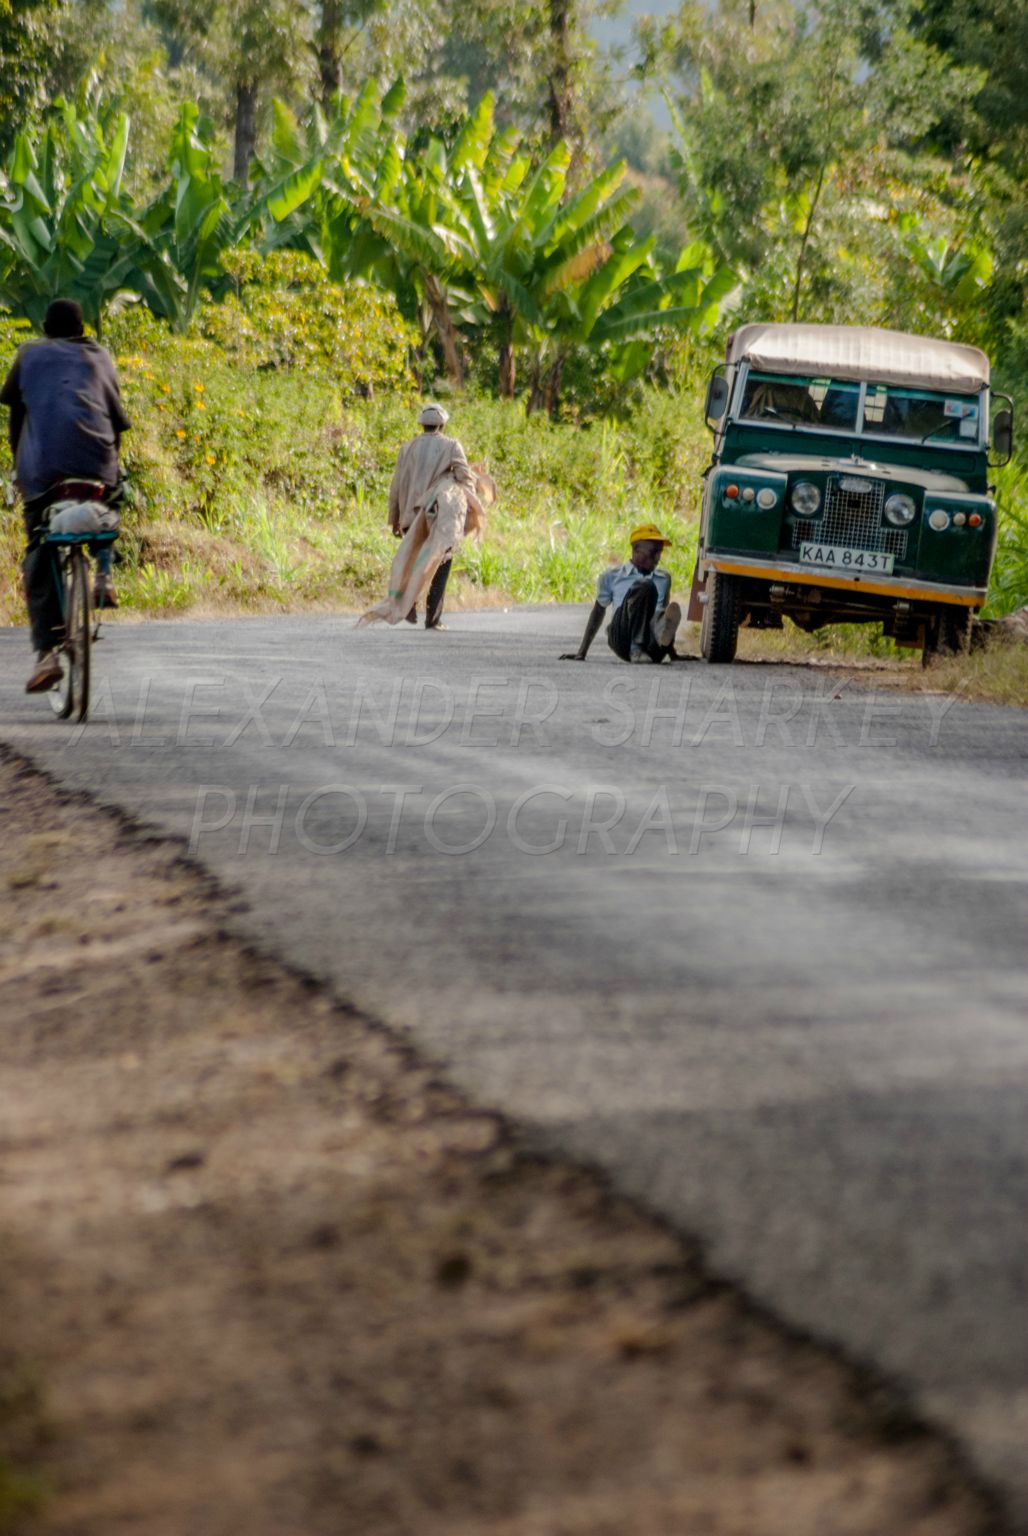 A long way from home, only one road went into Nkubu, a small rural town.  Most people walked, not many had the luxury of a bike, or money to hire a car.  Vehicles often broke down, and the saying, not too far, could mean several hours.